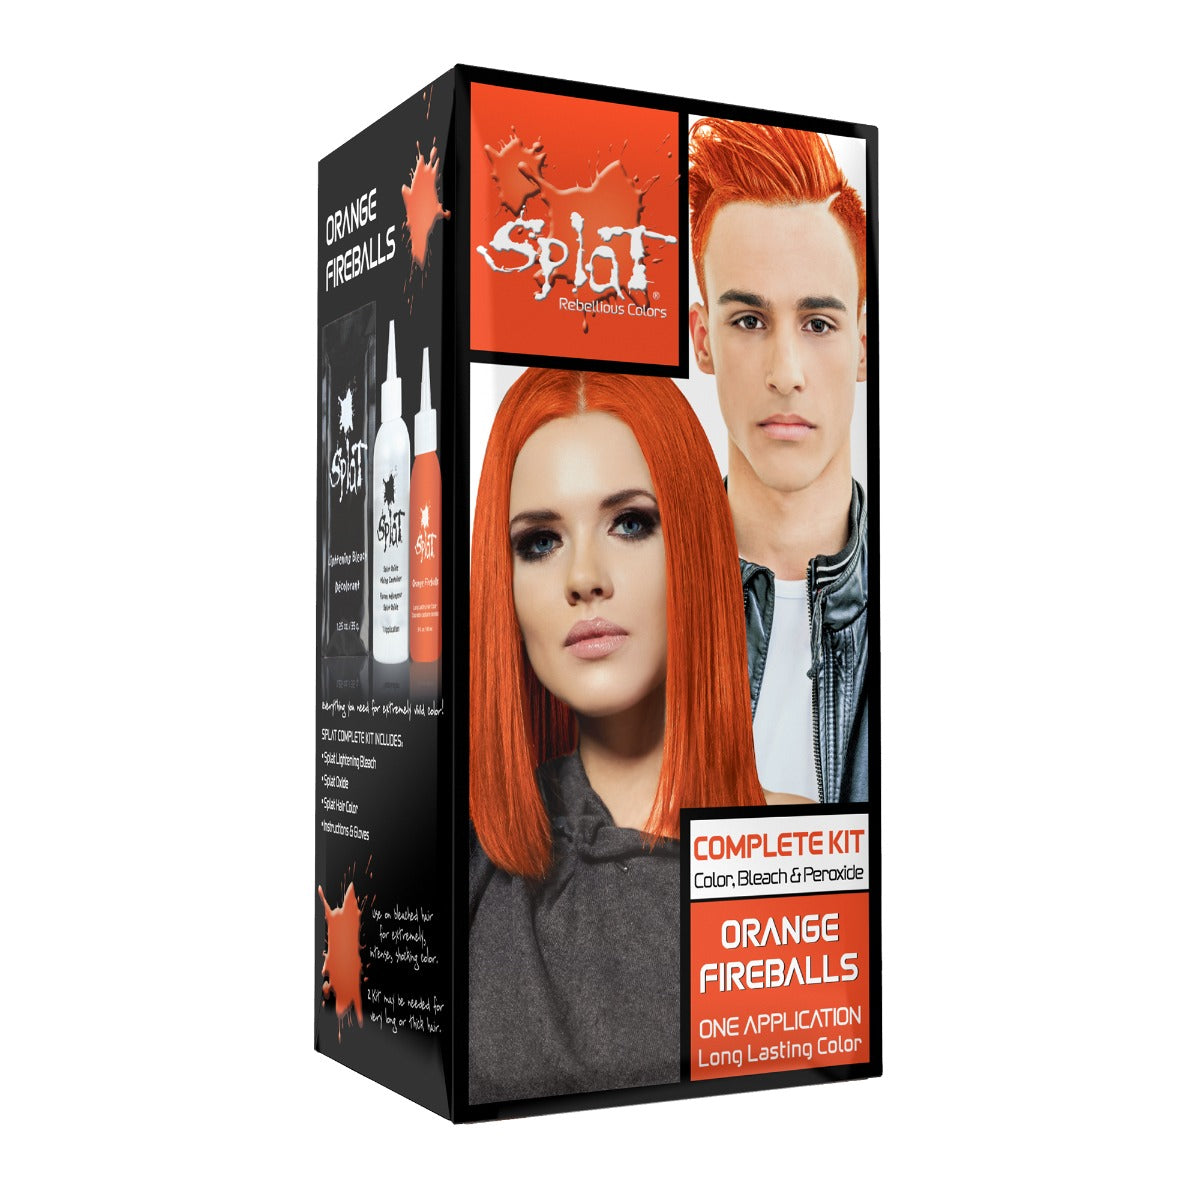 Original Complete Kit with Bleach and Semi-Permanent Hair Color – Orange Fireballs